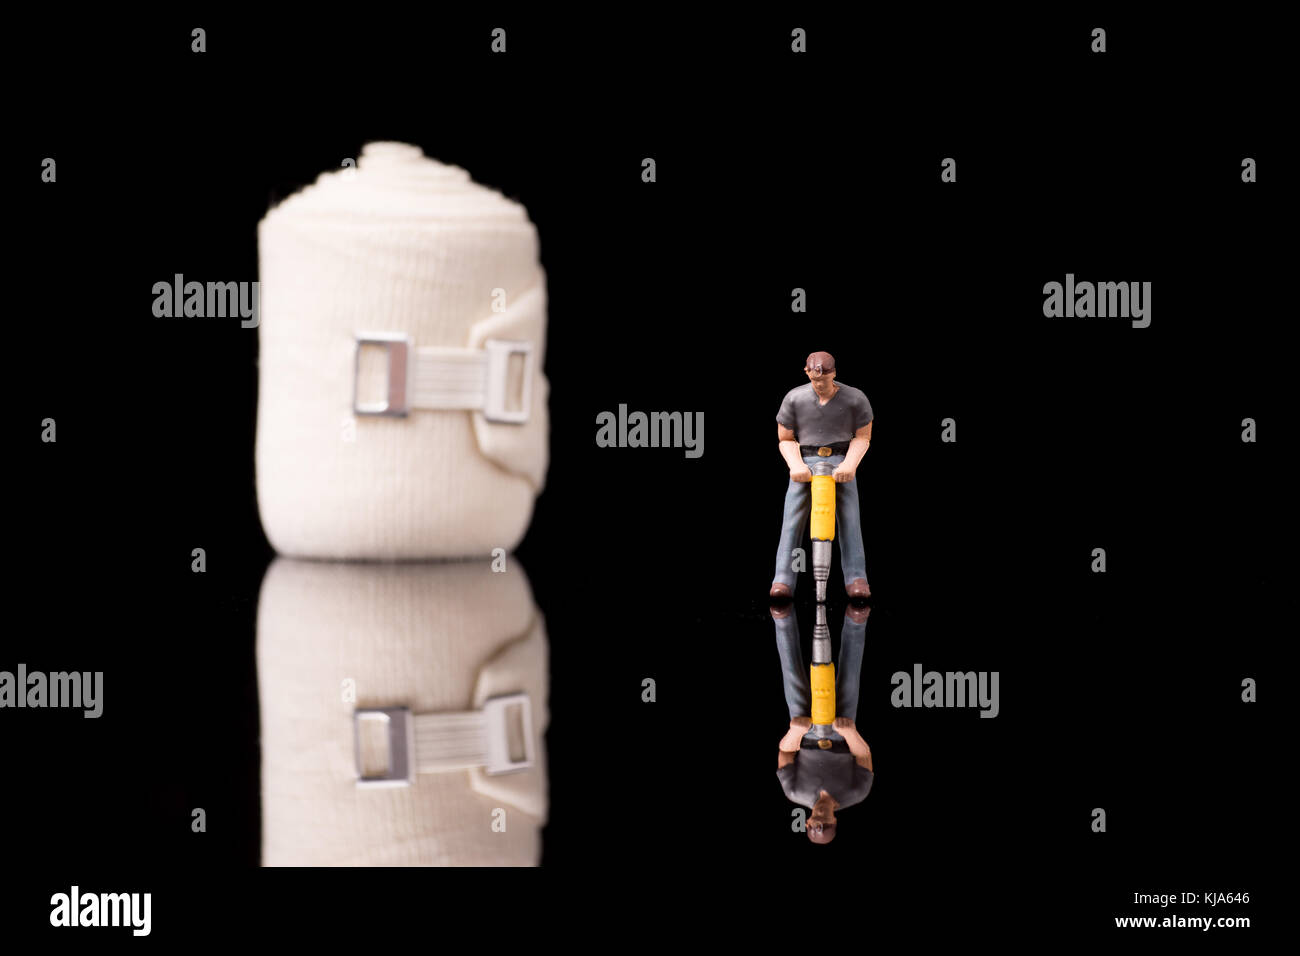 Bandage used for injuries during work, leisure time or in housework, isolated on glossy black background Stock Photo